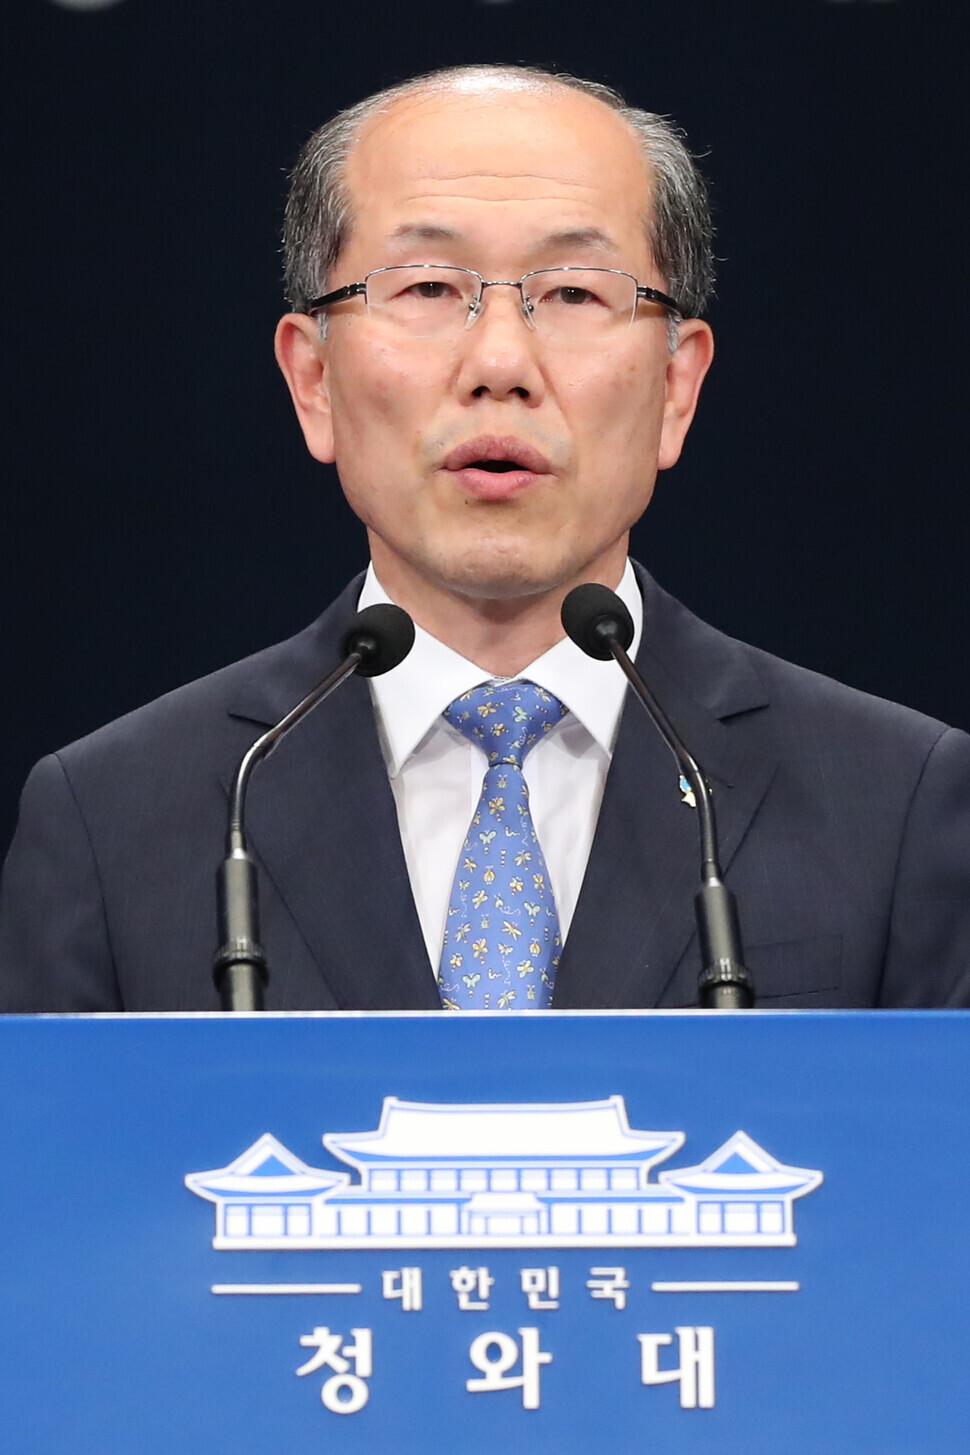 National Security Council Secretary General Kim You-geun addresses the launches of propaganda balloons across the inter-Korean border by defector groups during a Blue House briefing on June 11. (Blue House photo pool)